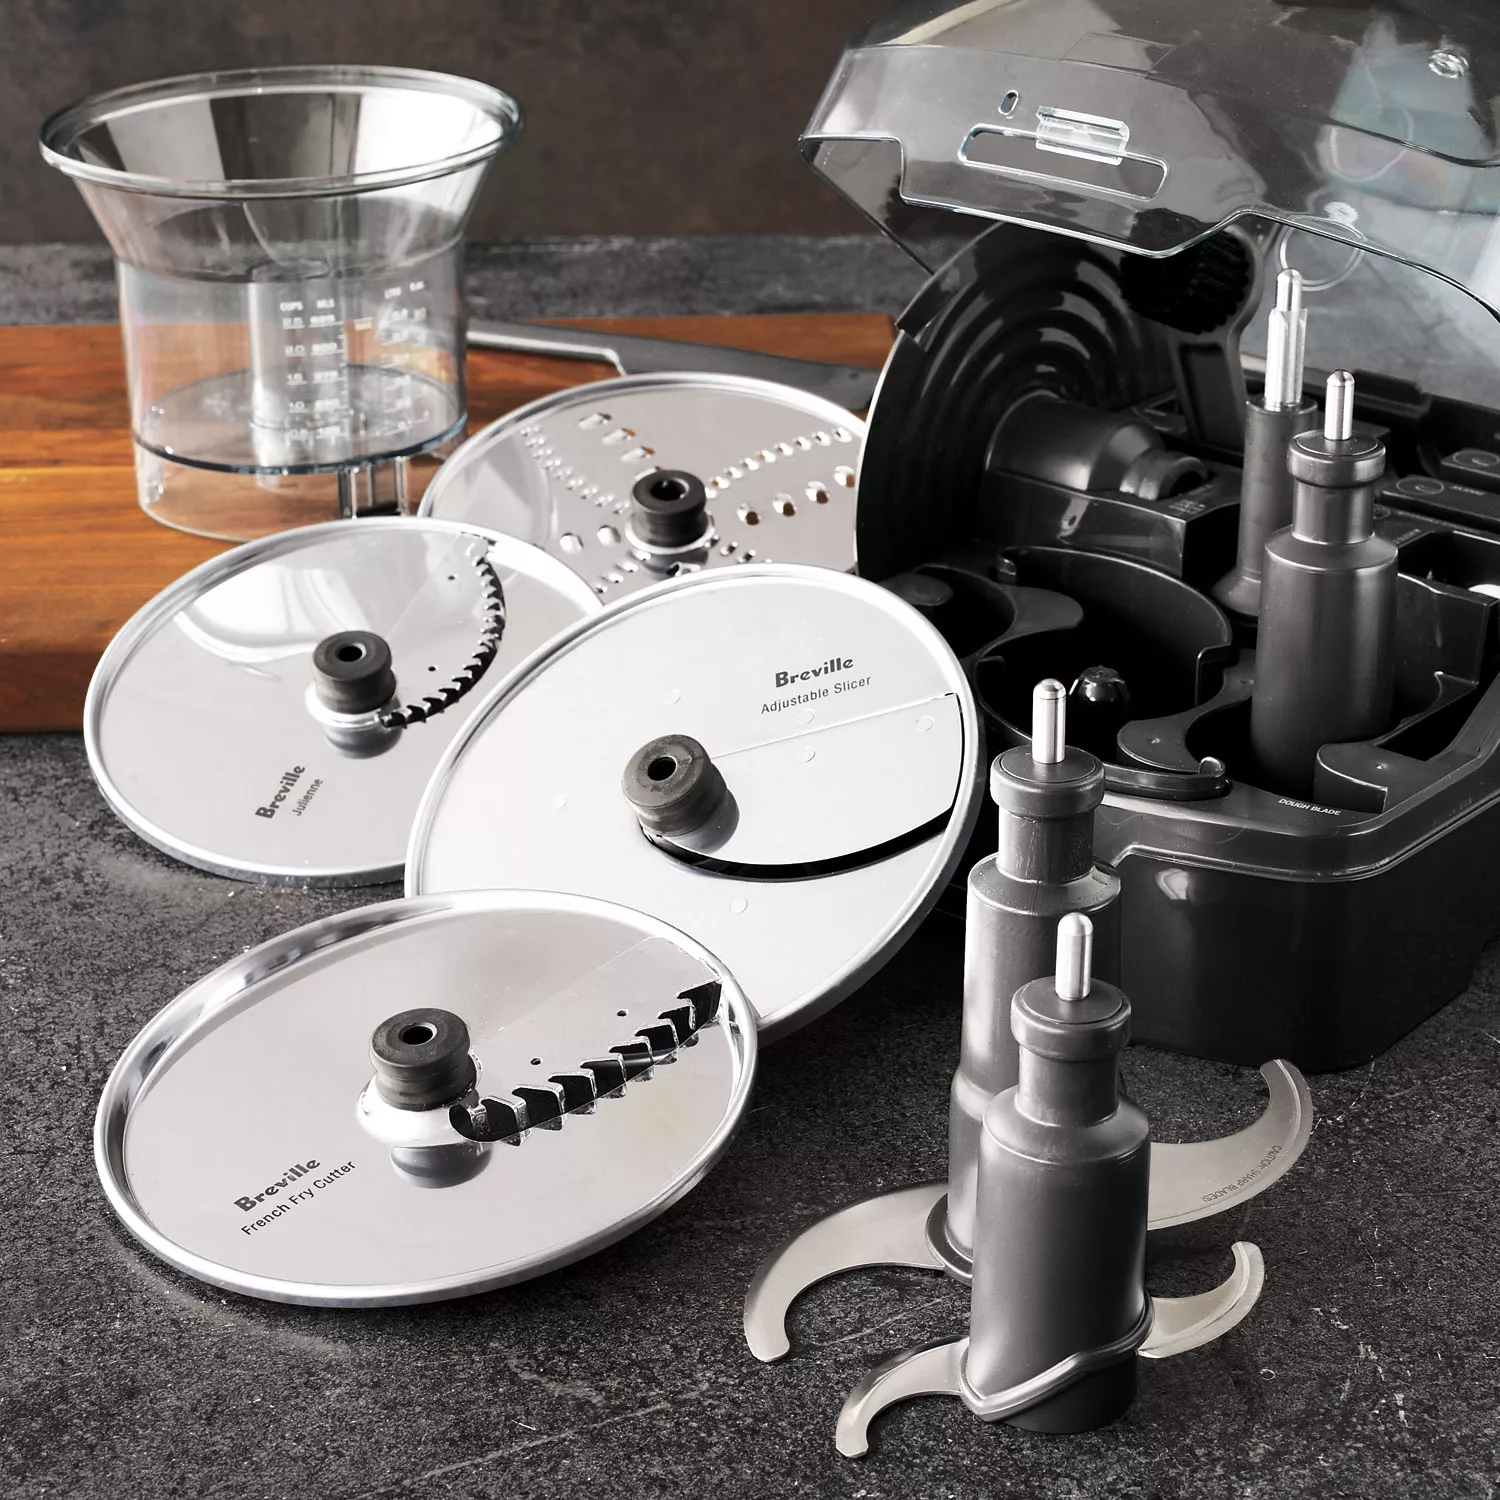 Breville Sous Chef Food Processor-Silver - Spoil the Cook